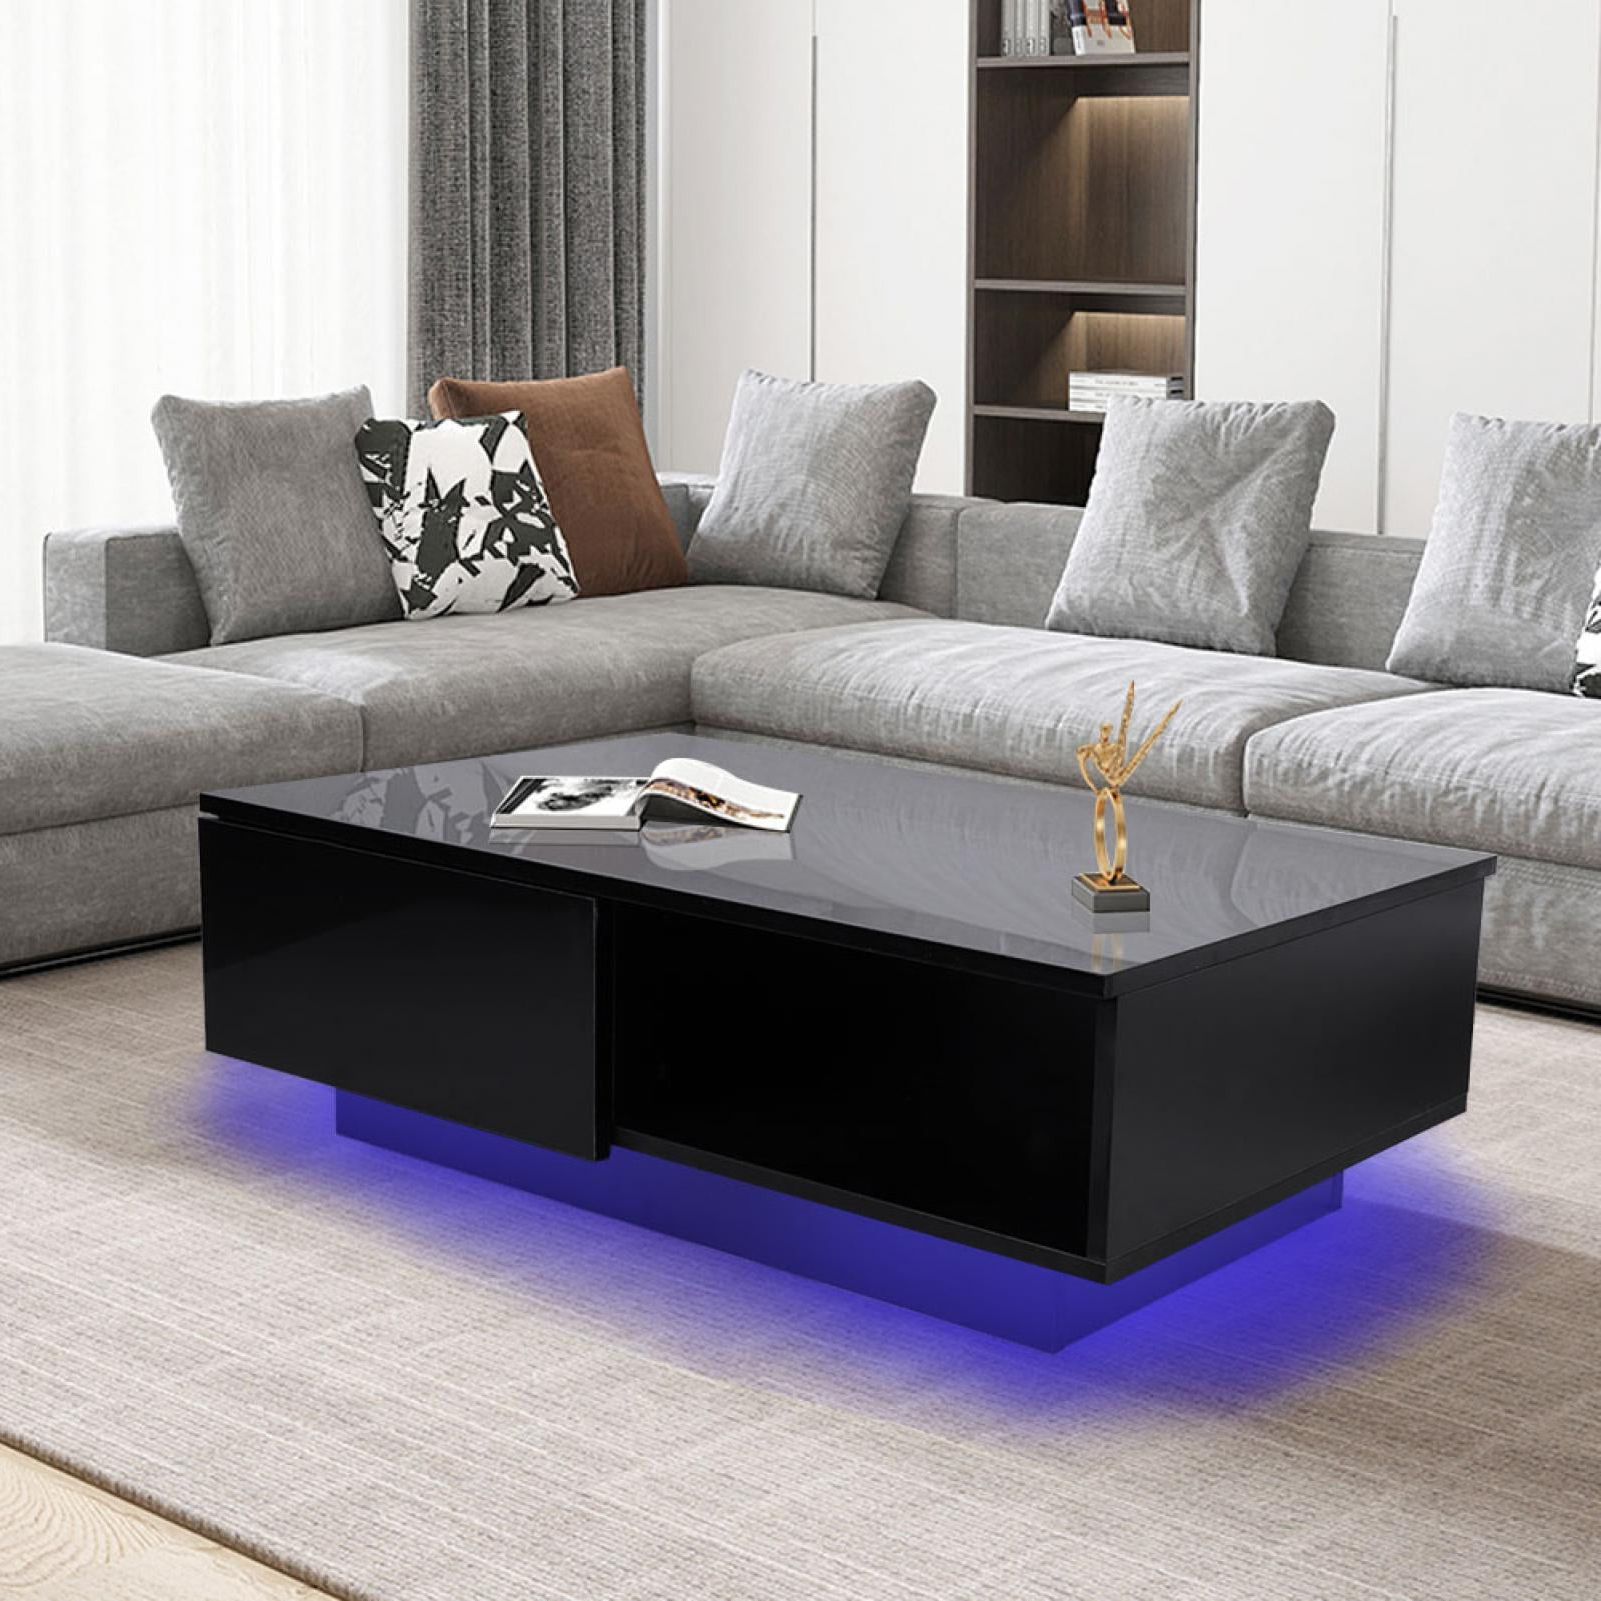 Most Popular High Gloss Black Coffee Tables Throughout Ebtools Rectangle Led Coffee Table, Black Modern High Gloss Furniture (View 14 of 15)